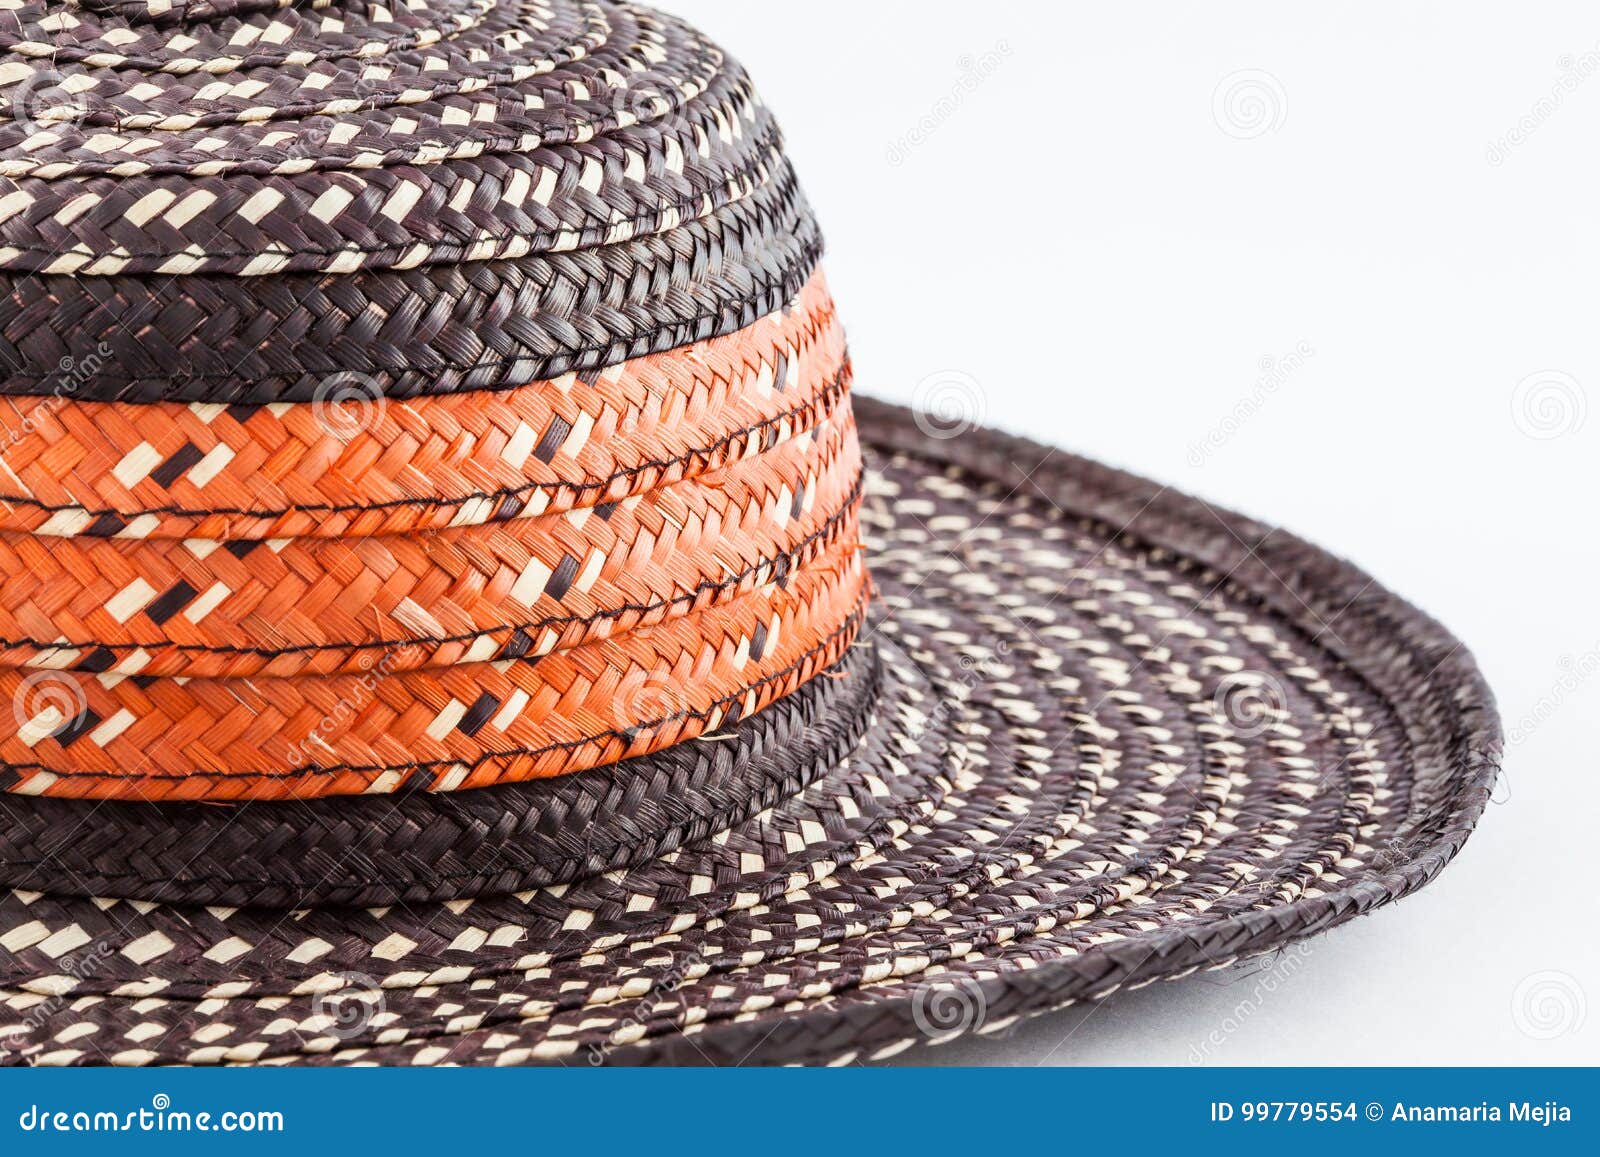 traditional hat from colombia